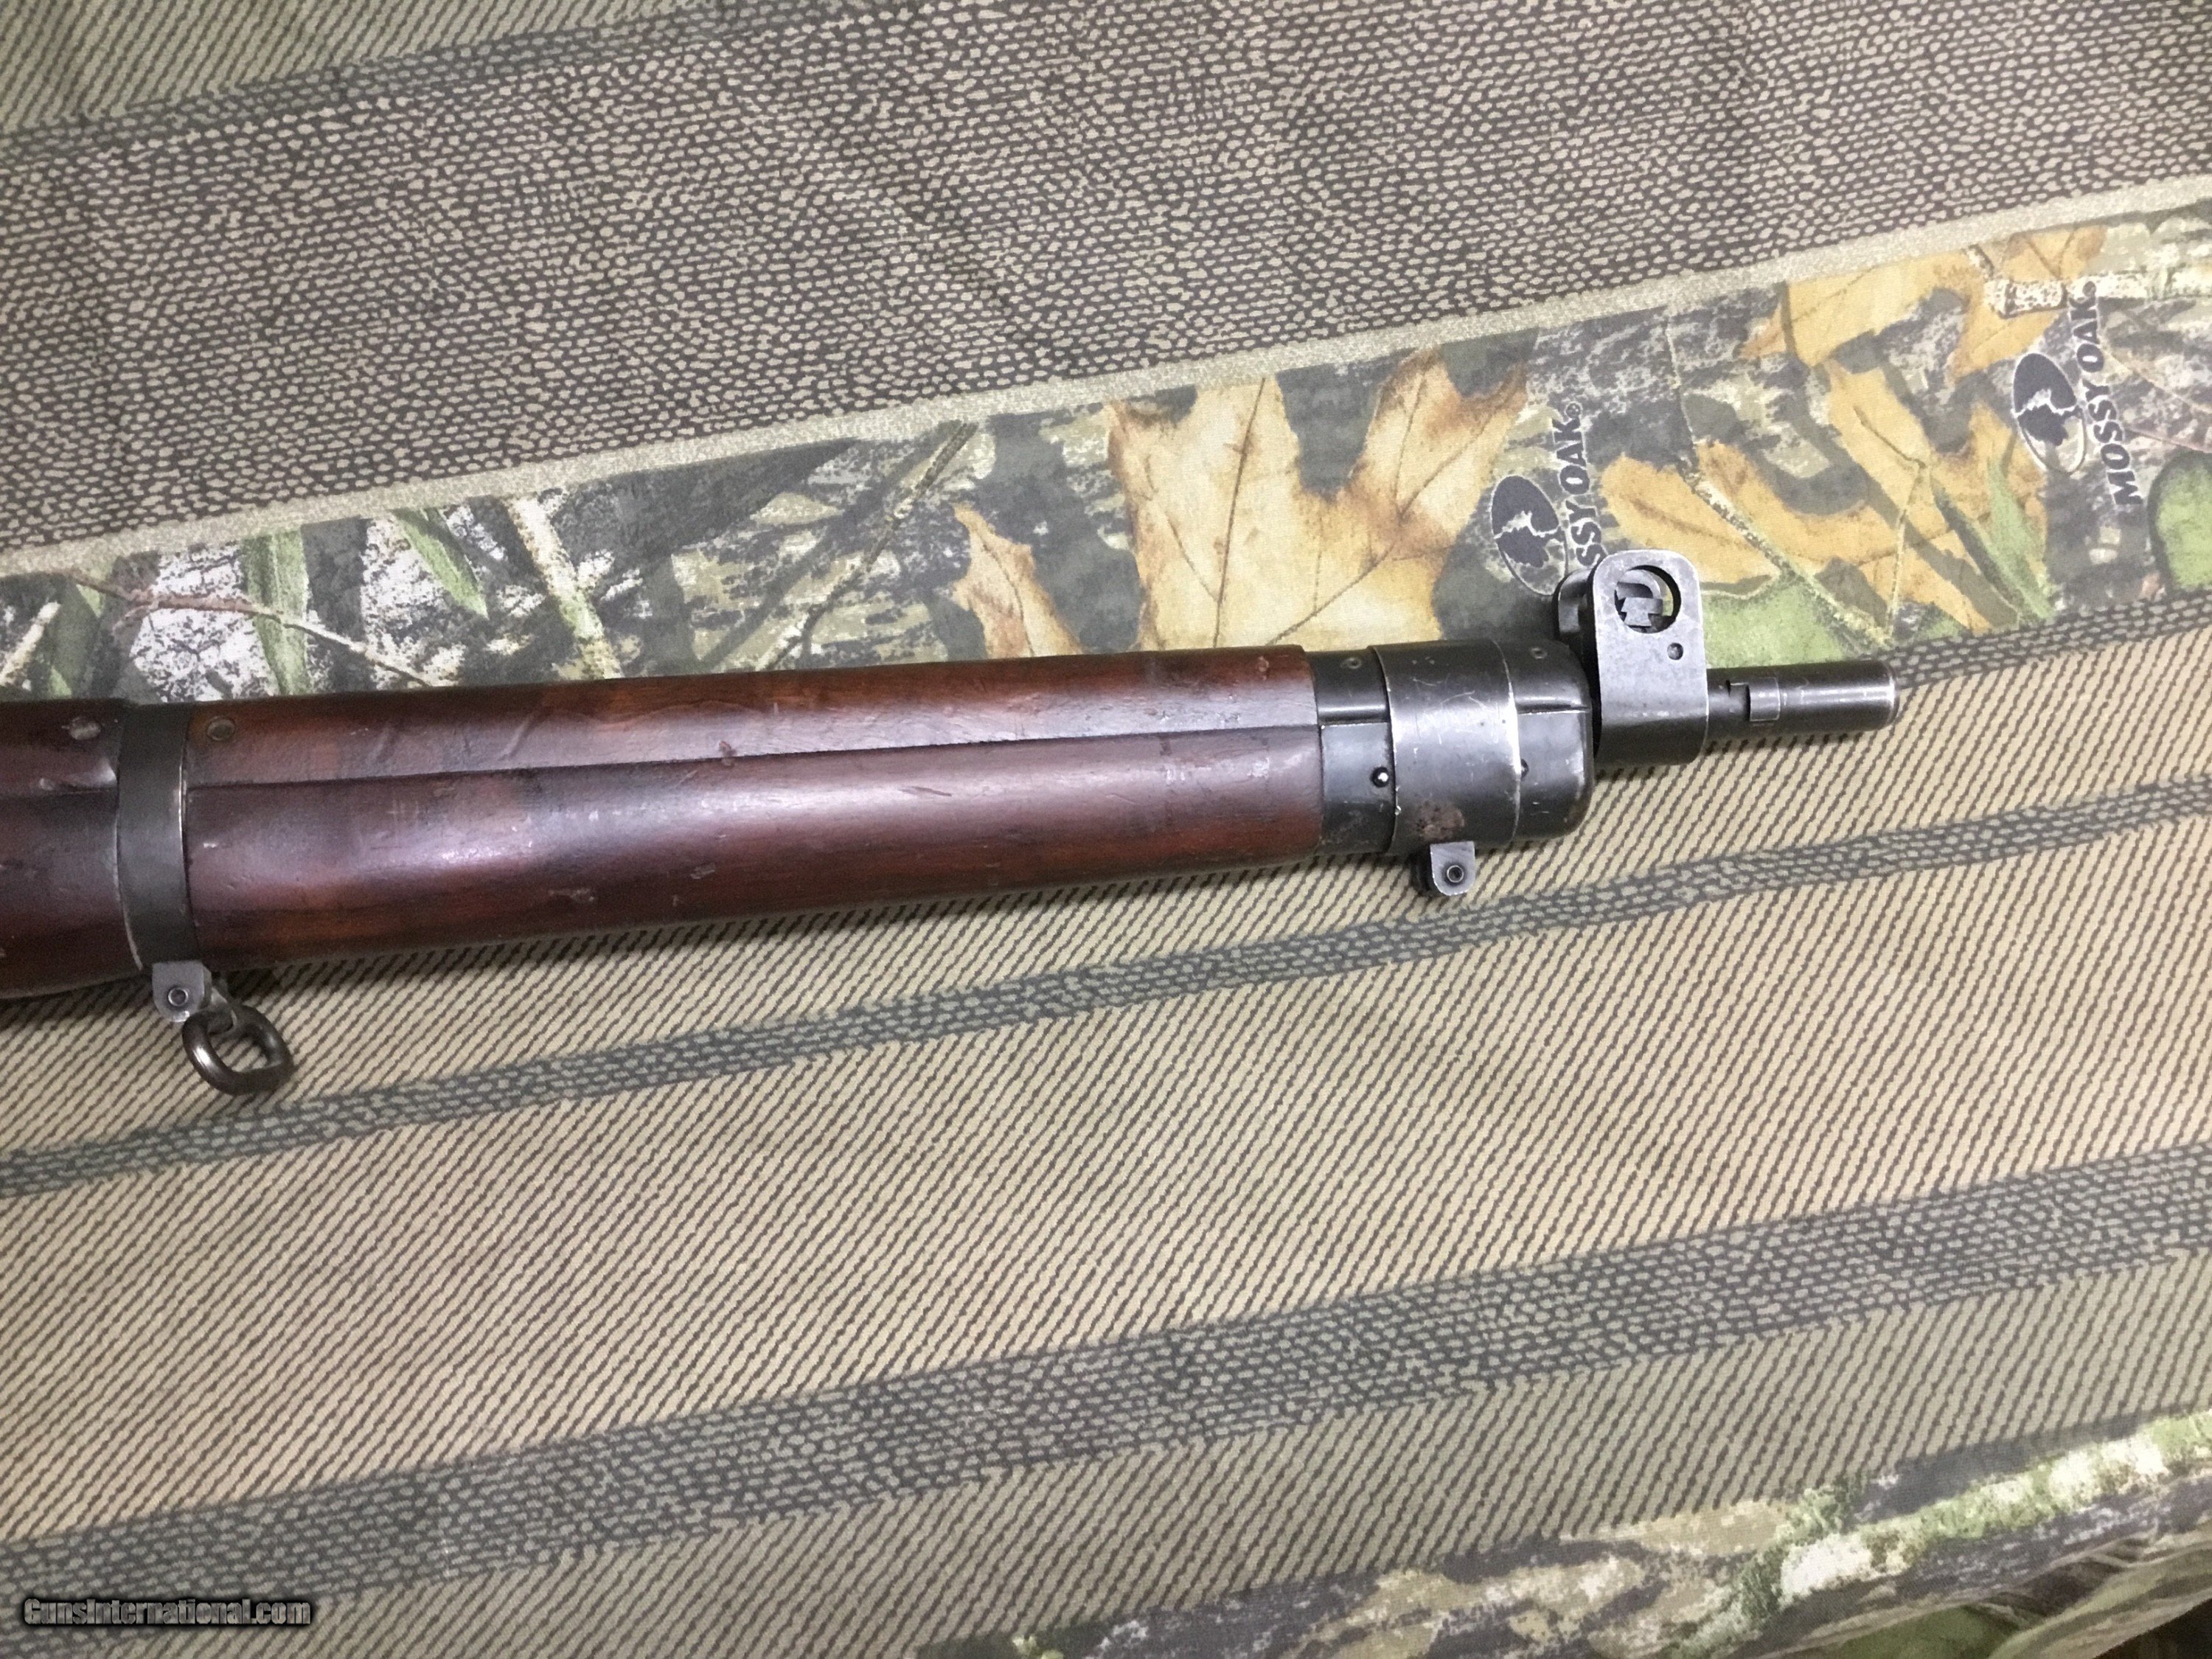 Rifles of the World: Canadian Long Branch No. 4 Mk1* 